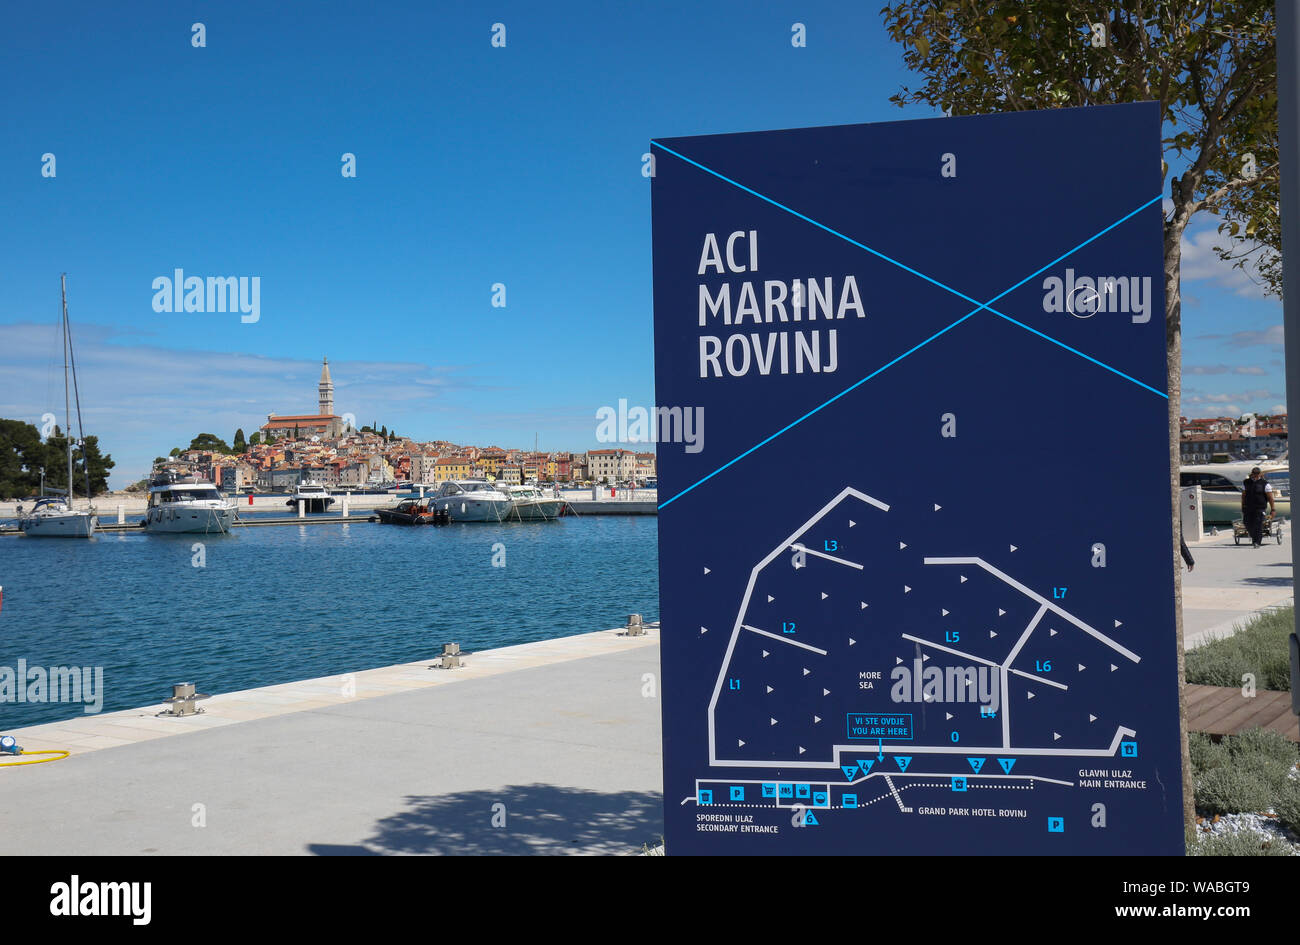 South end seaside promenade and yachts in the five star ACI marina with town of Rovinj in the background, Istria, Croatia Stock Photo